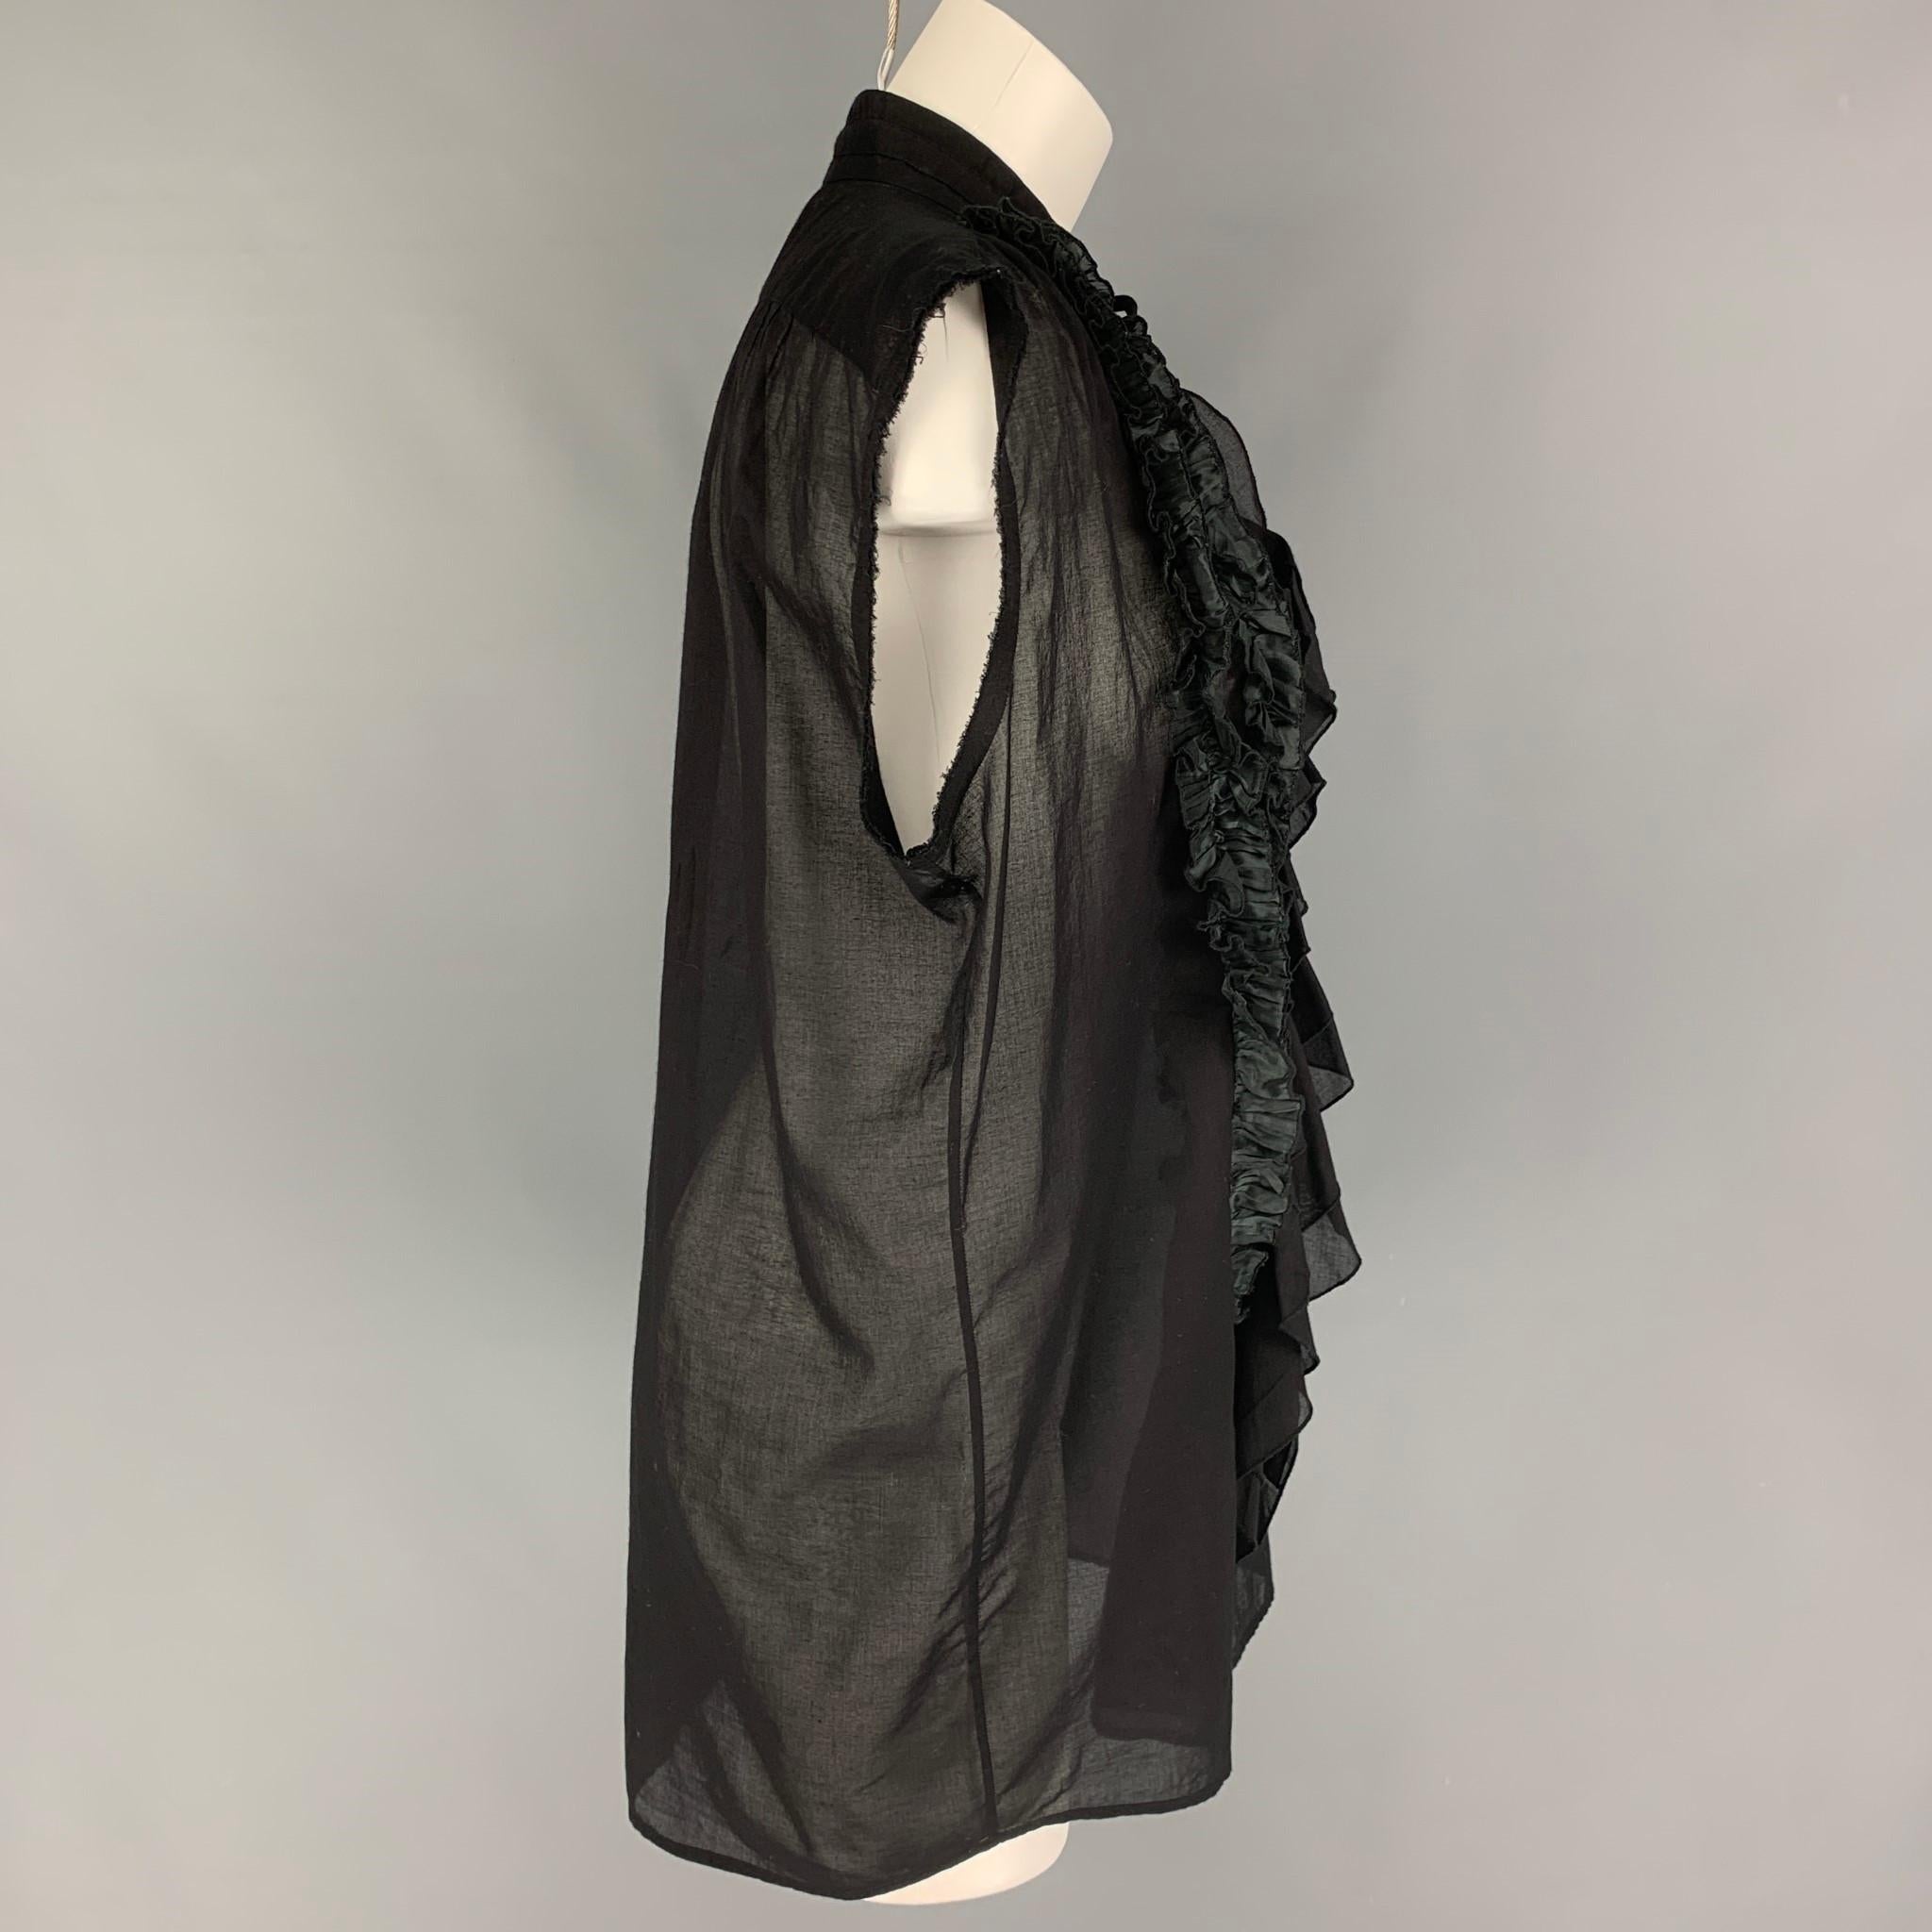 DRIES VAN NOTEN blouse comes in a black cotton featuring a sleeveless style, ruffle design, and a buttoned closure. 

Very Good Pre-Owned Condition.
Marked: 40

Measurements:

Shoulder: 18 in.
Bust: 44 in.
Length: 31 in. 